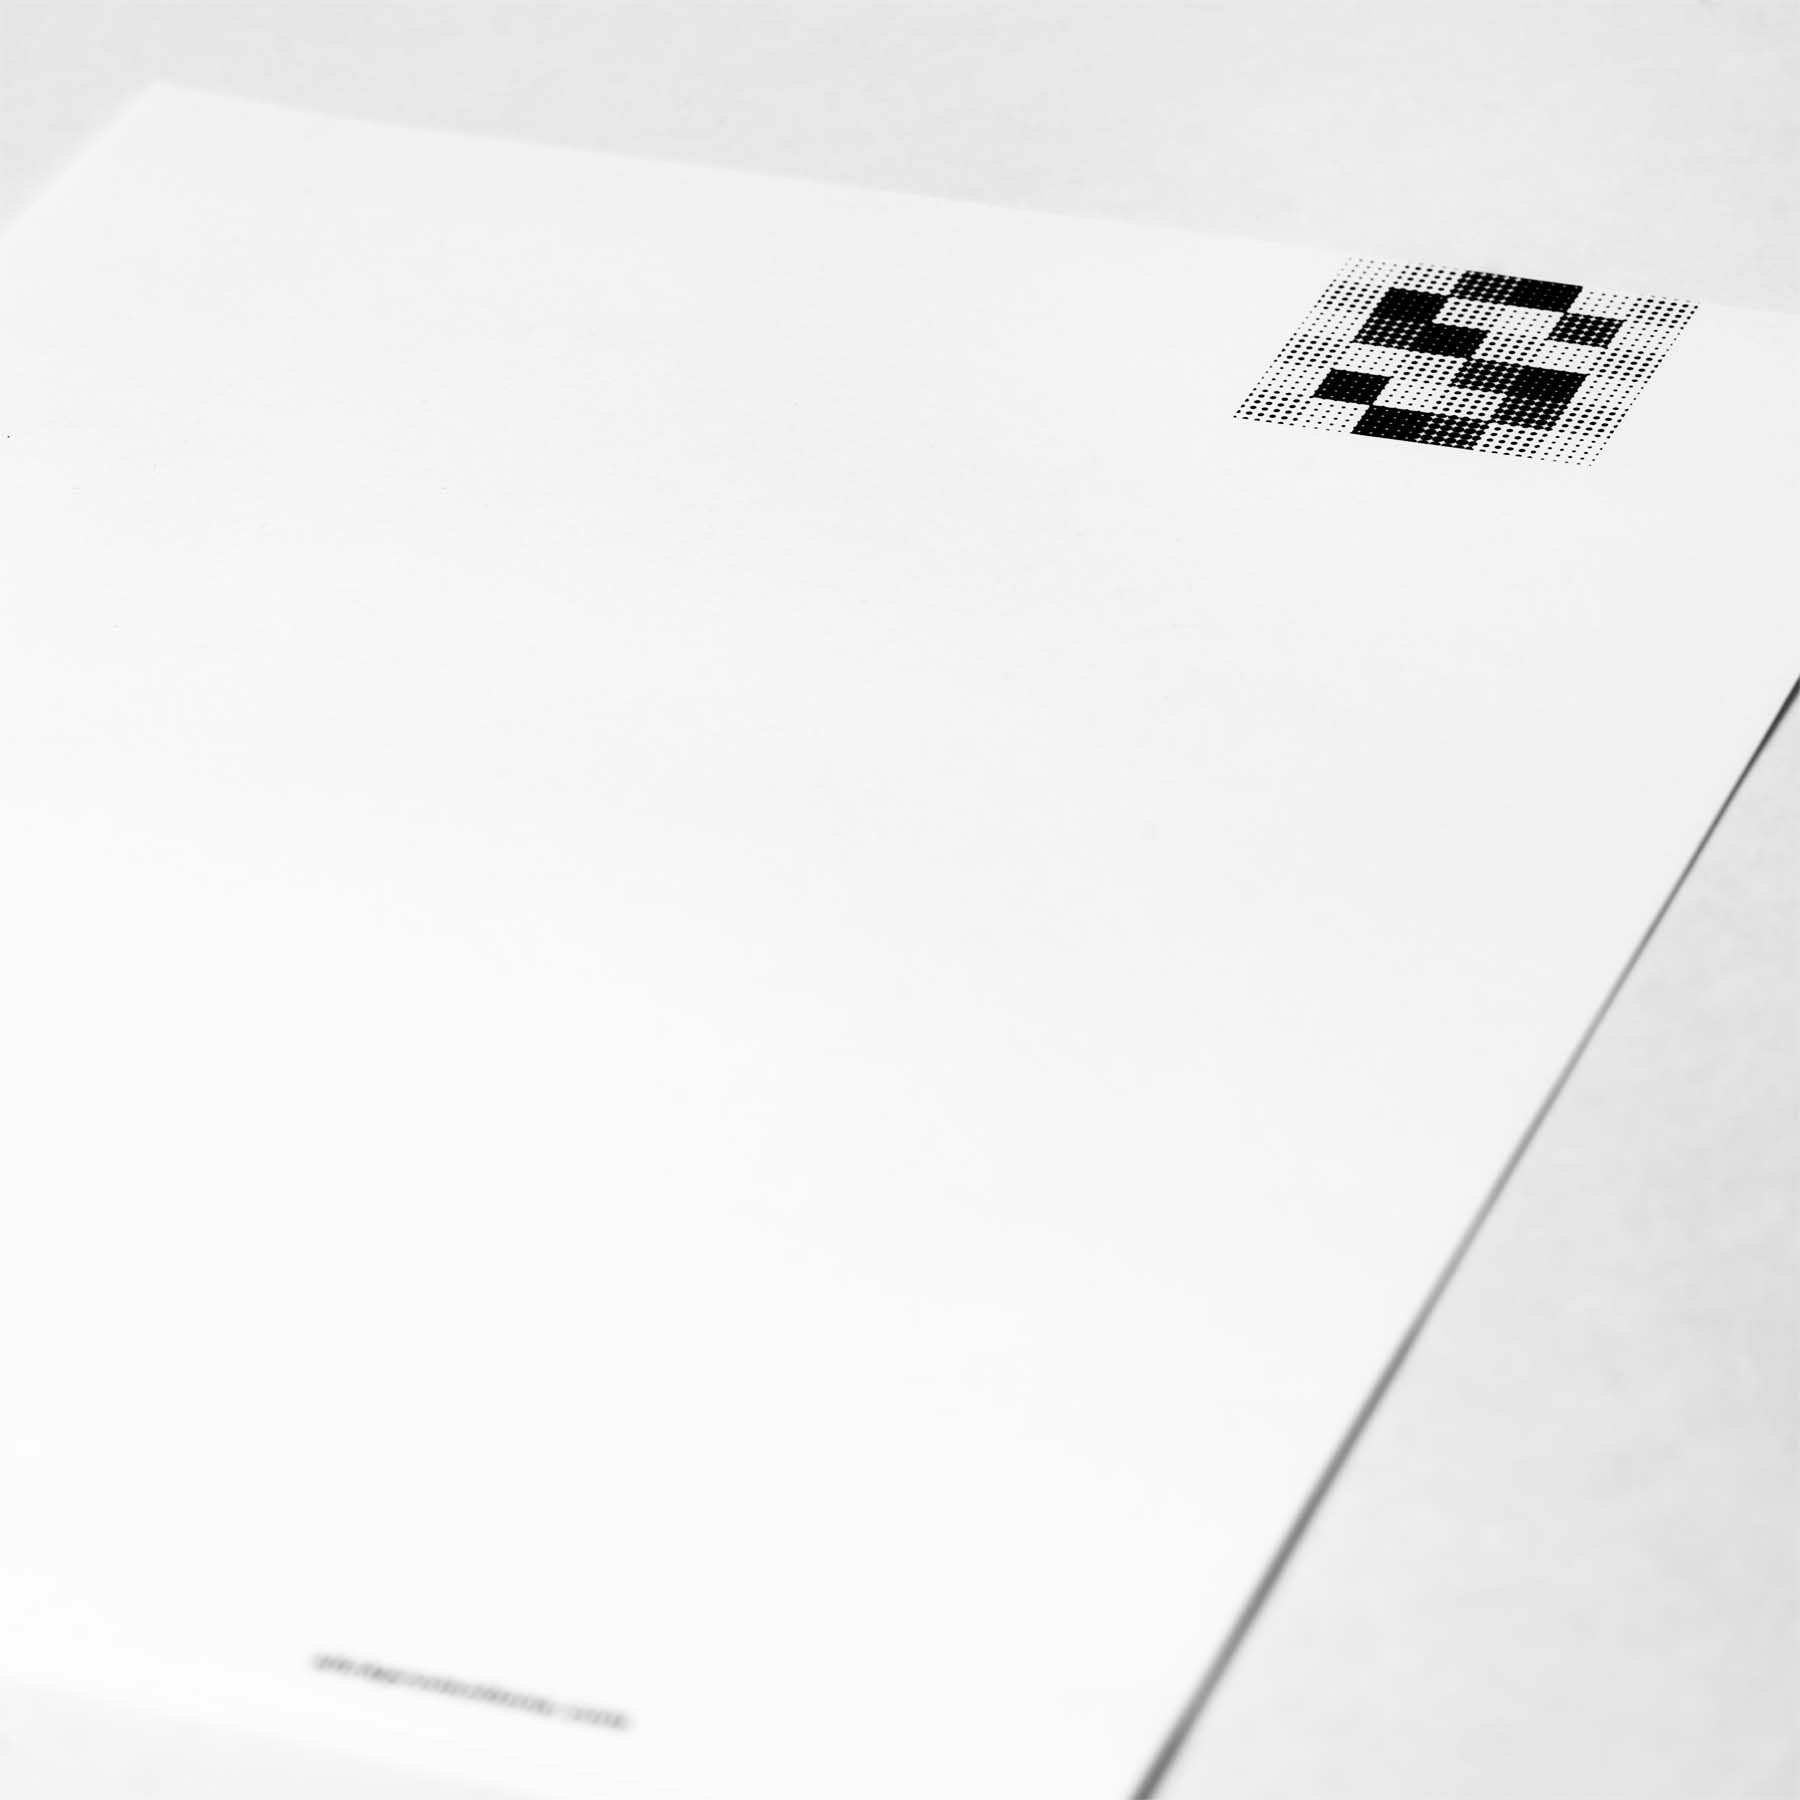 Letterhead featuring an in focus Slick Promotions logo.